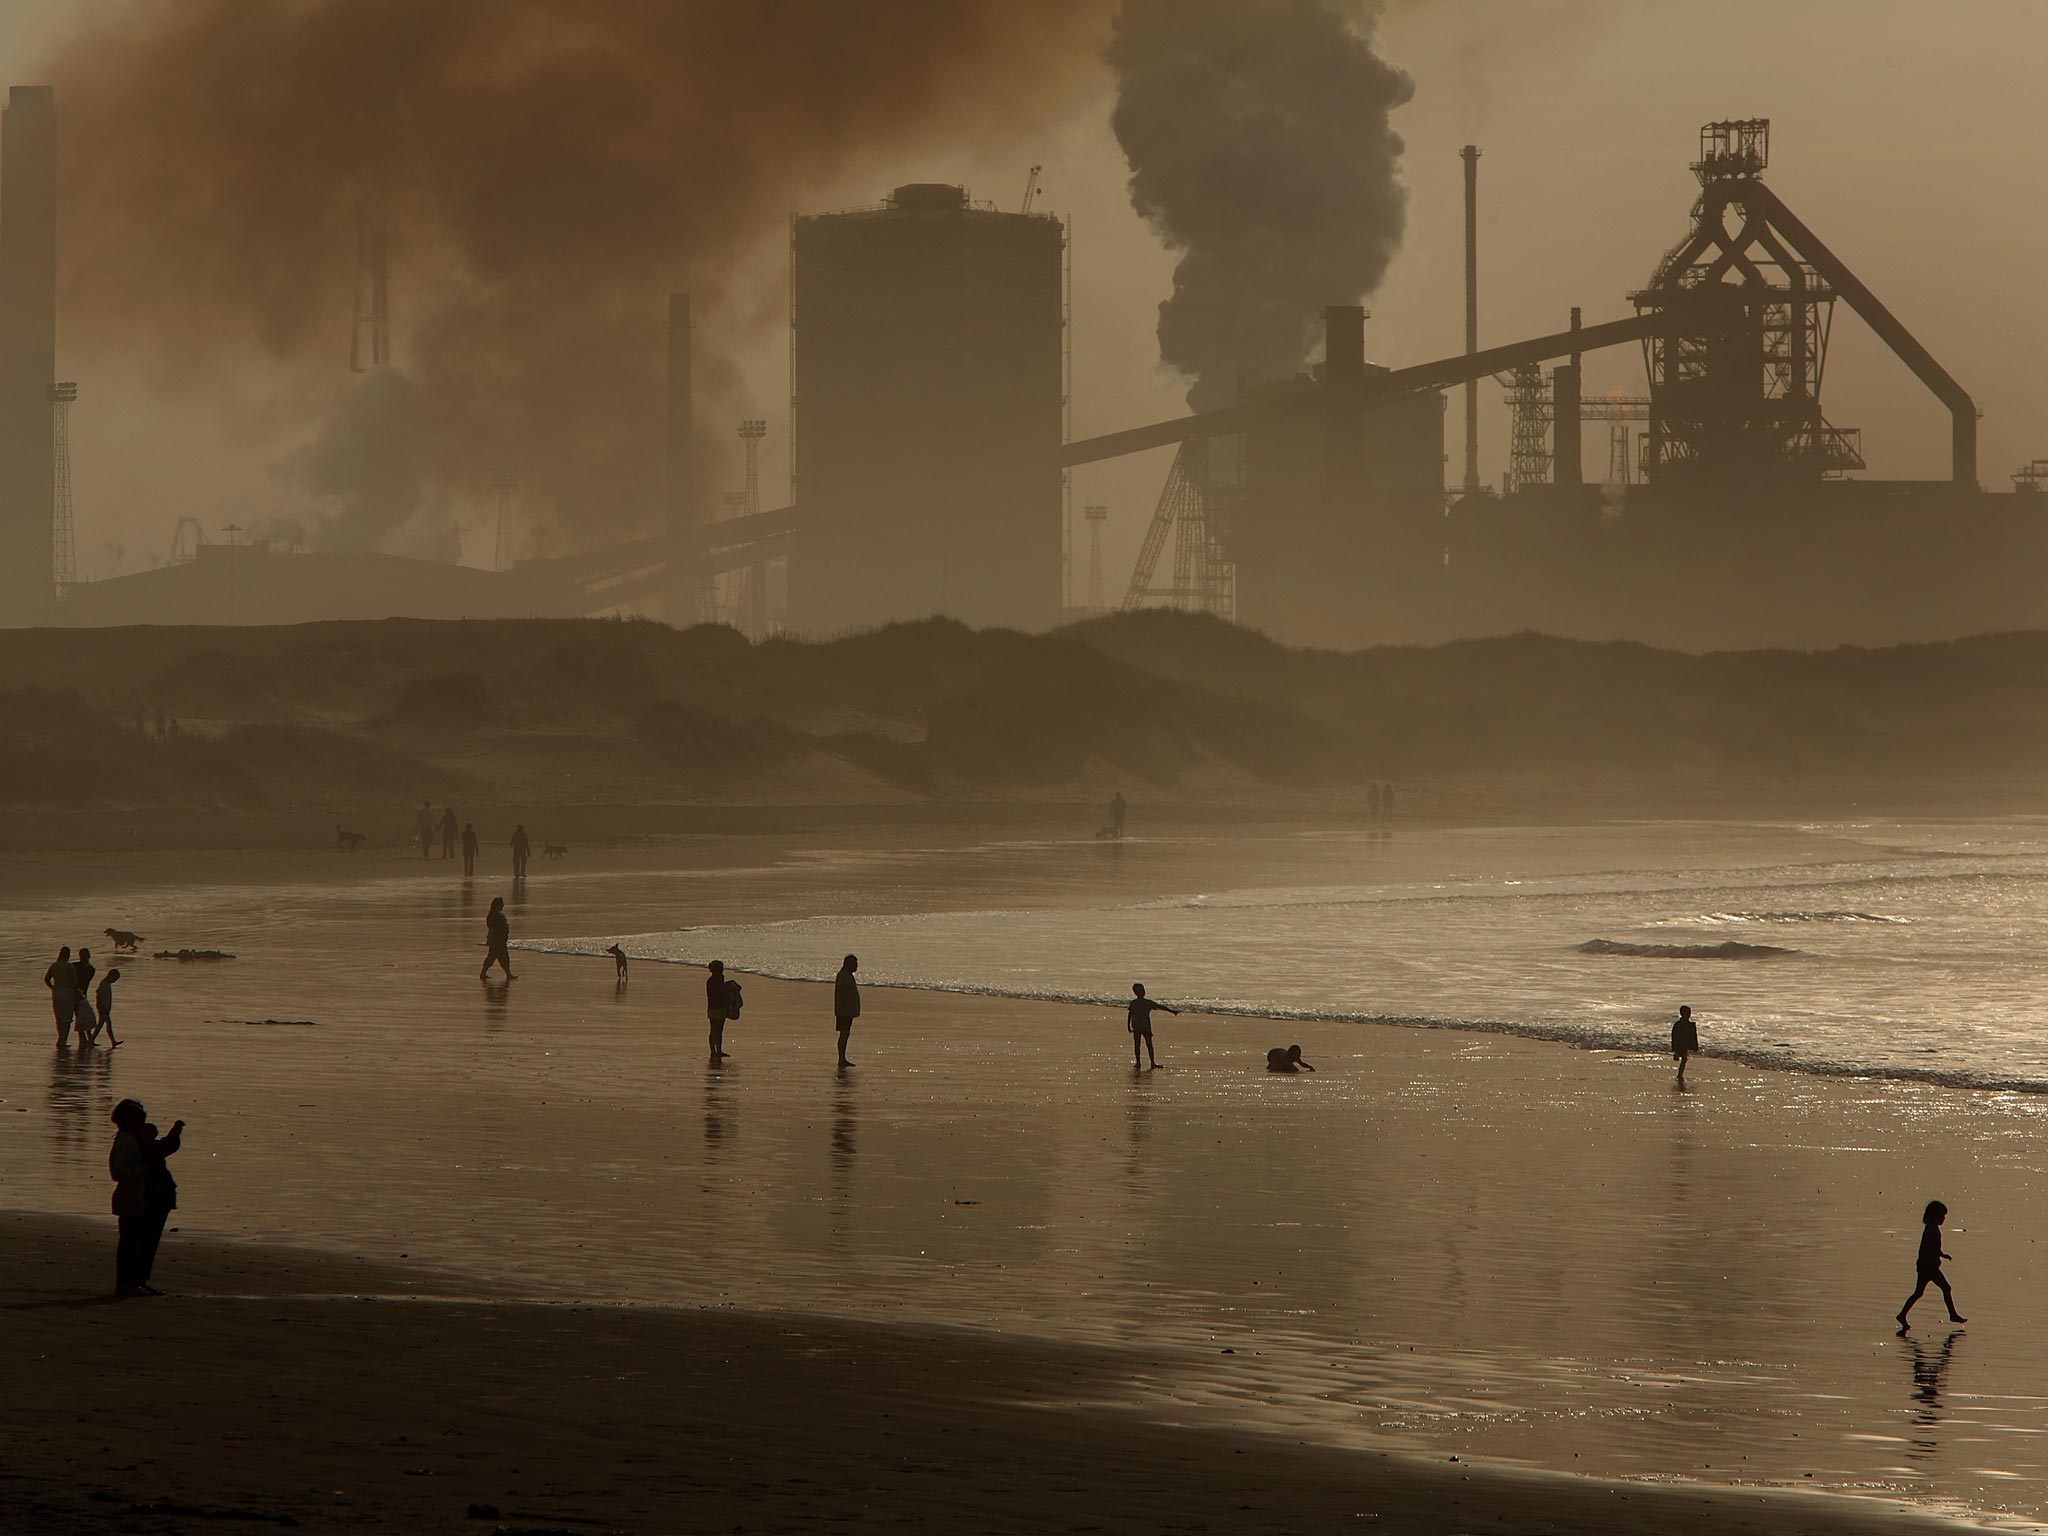 Pea soupers: locals on Redcar beach in the shadow of the Corus Steelworks in Teesside